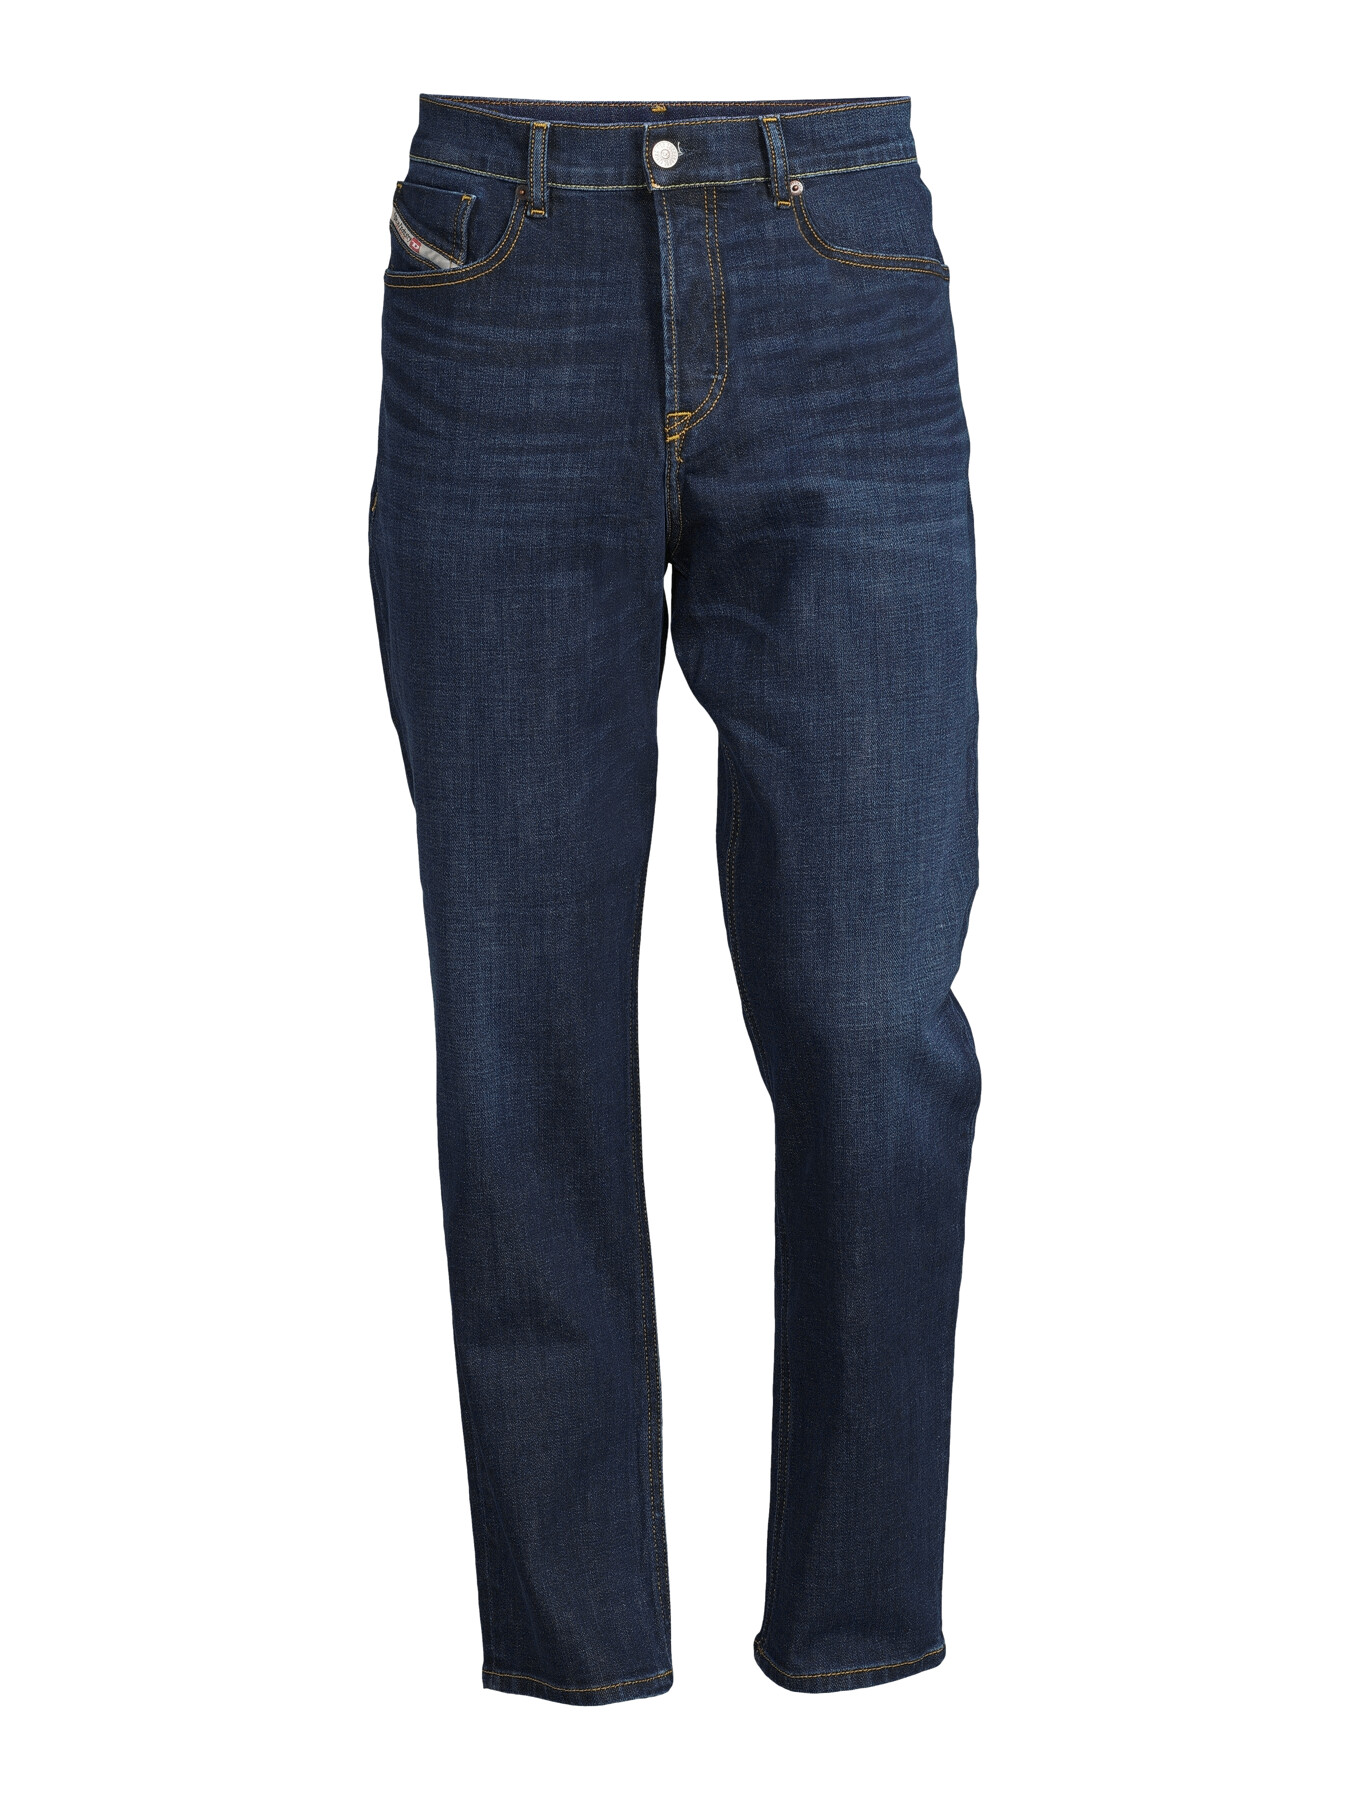 Mens Clothing Jeans Skinny jeans DIESEL 2005 D-fining Tapered Jeans in Blue for Men Save 20% 